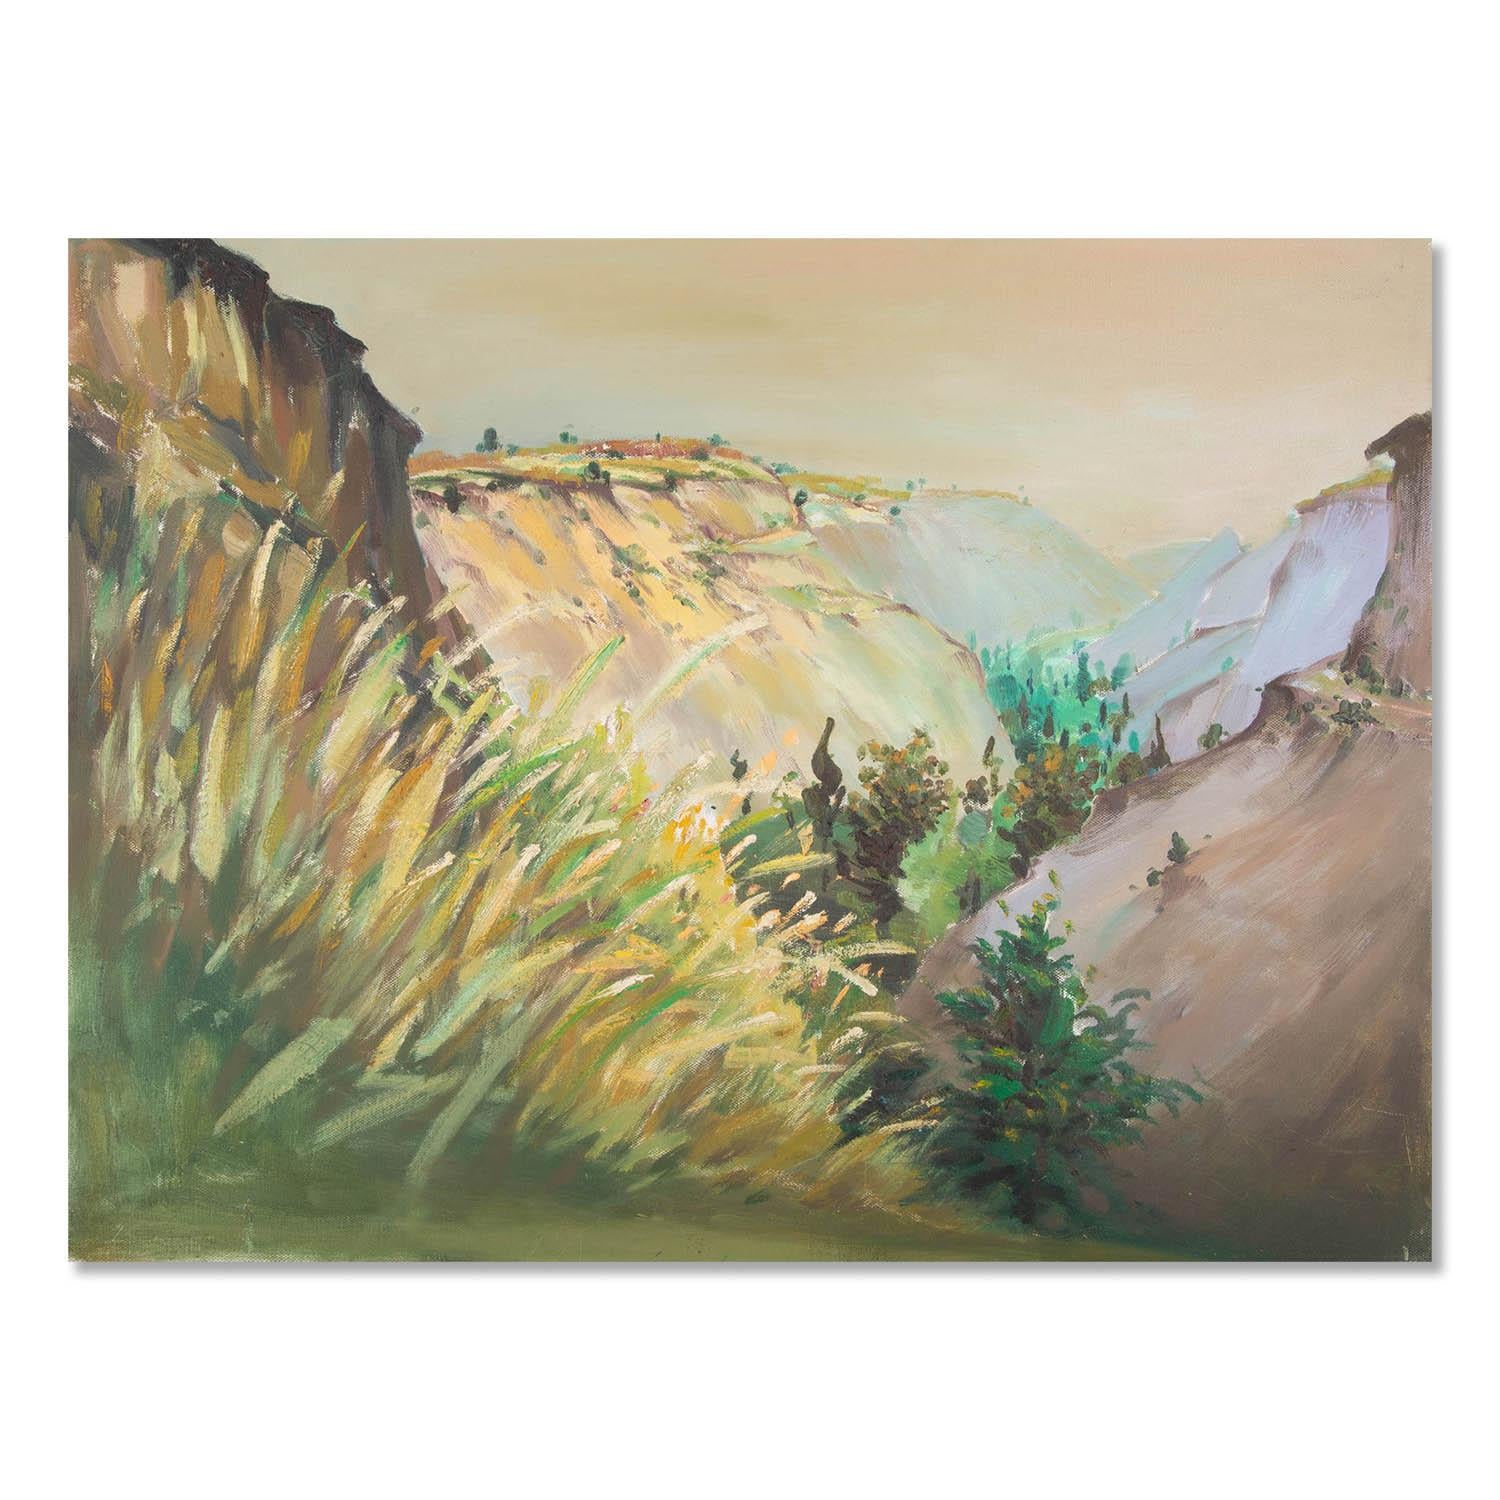  Title: Phoenix Ridge 3
 Medium: Oil on canvas
 Size: 23.5 x 31.5 inches
 Frame: Framing options available!
 Condition: The painting appears to be in excellent condition.
 
 Year: 2000 Circa
 Artist: Bo Song 
 Signature: Unsigned
 Signature